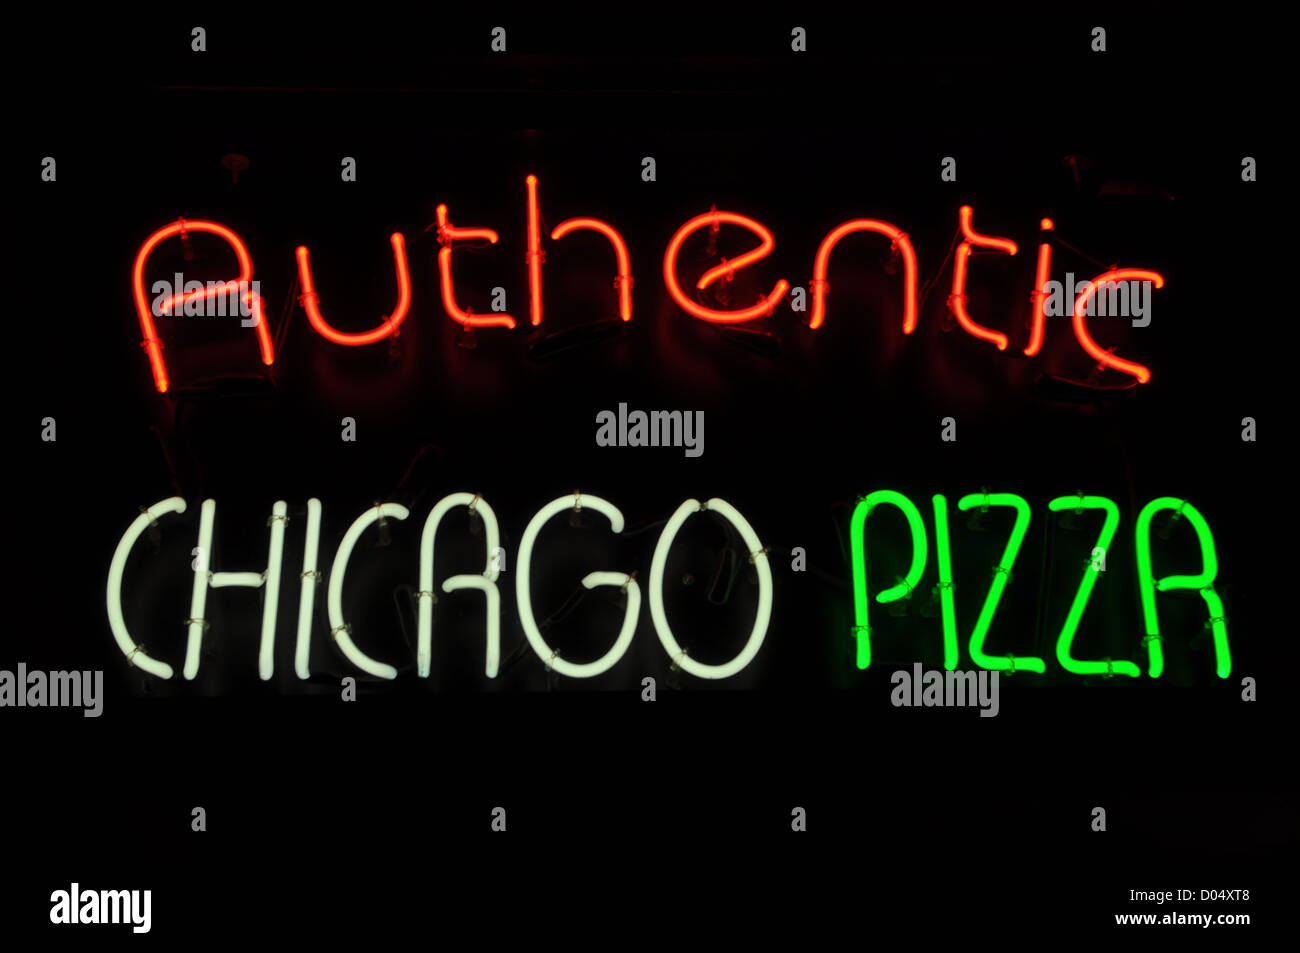 Chicago Pizza Neon Red White Green Sign Stock Photo